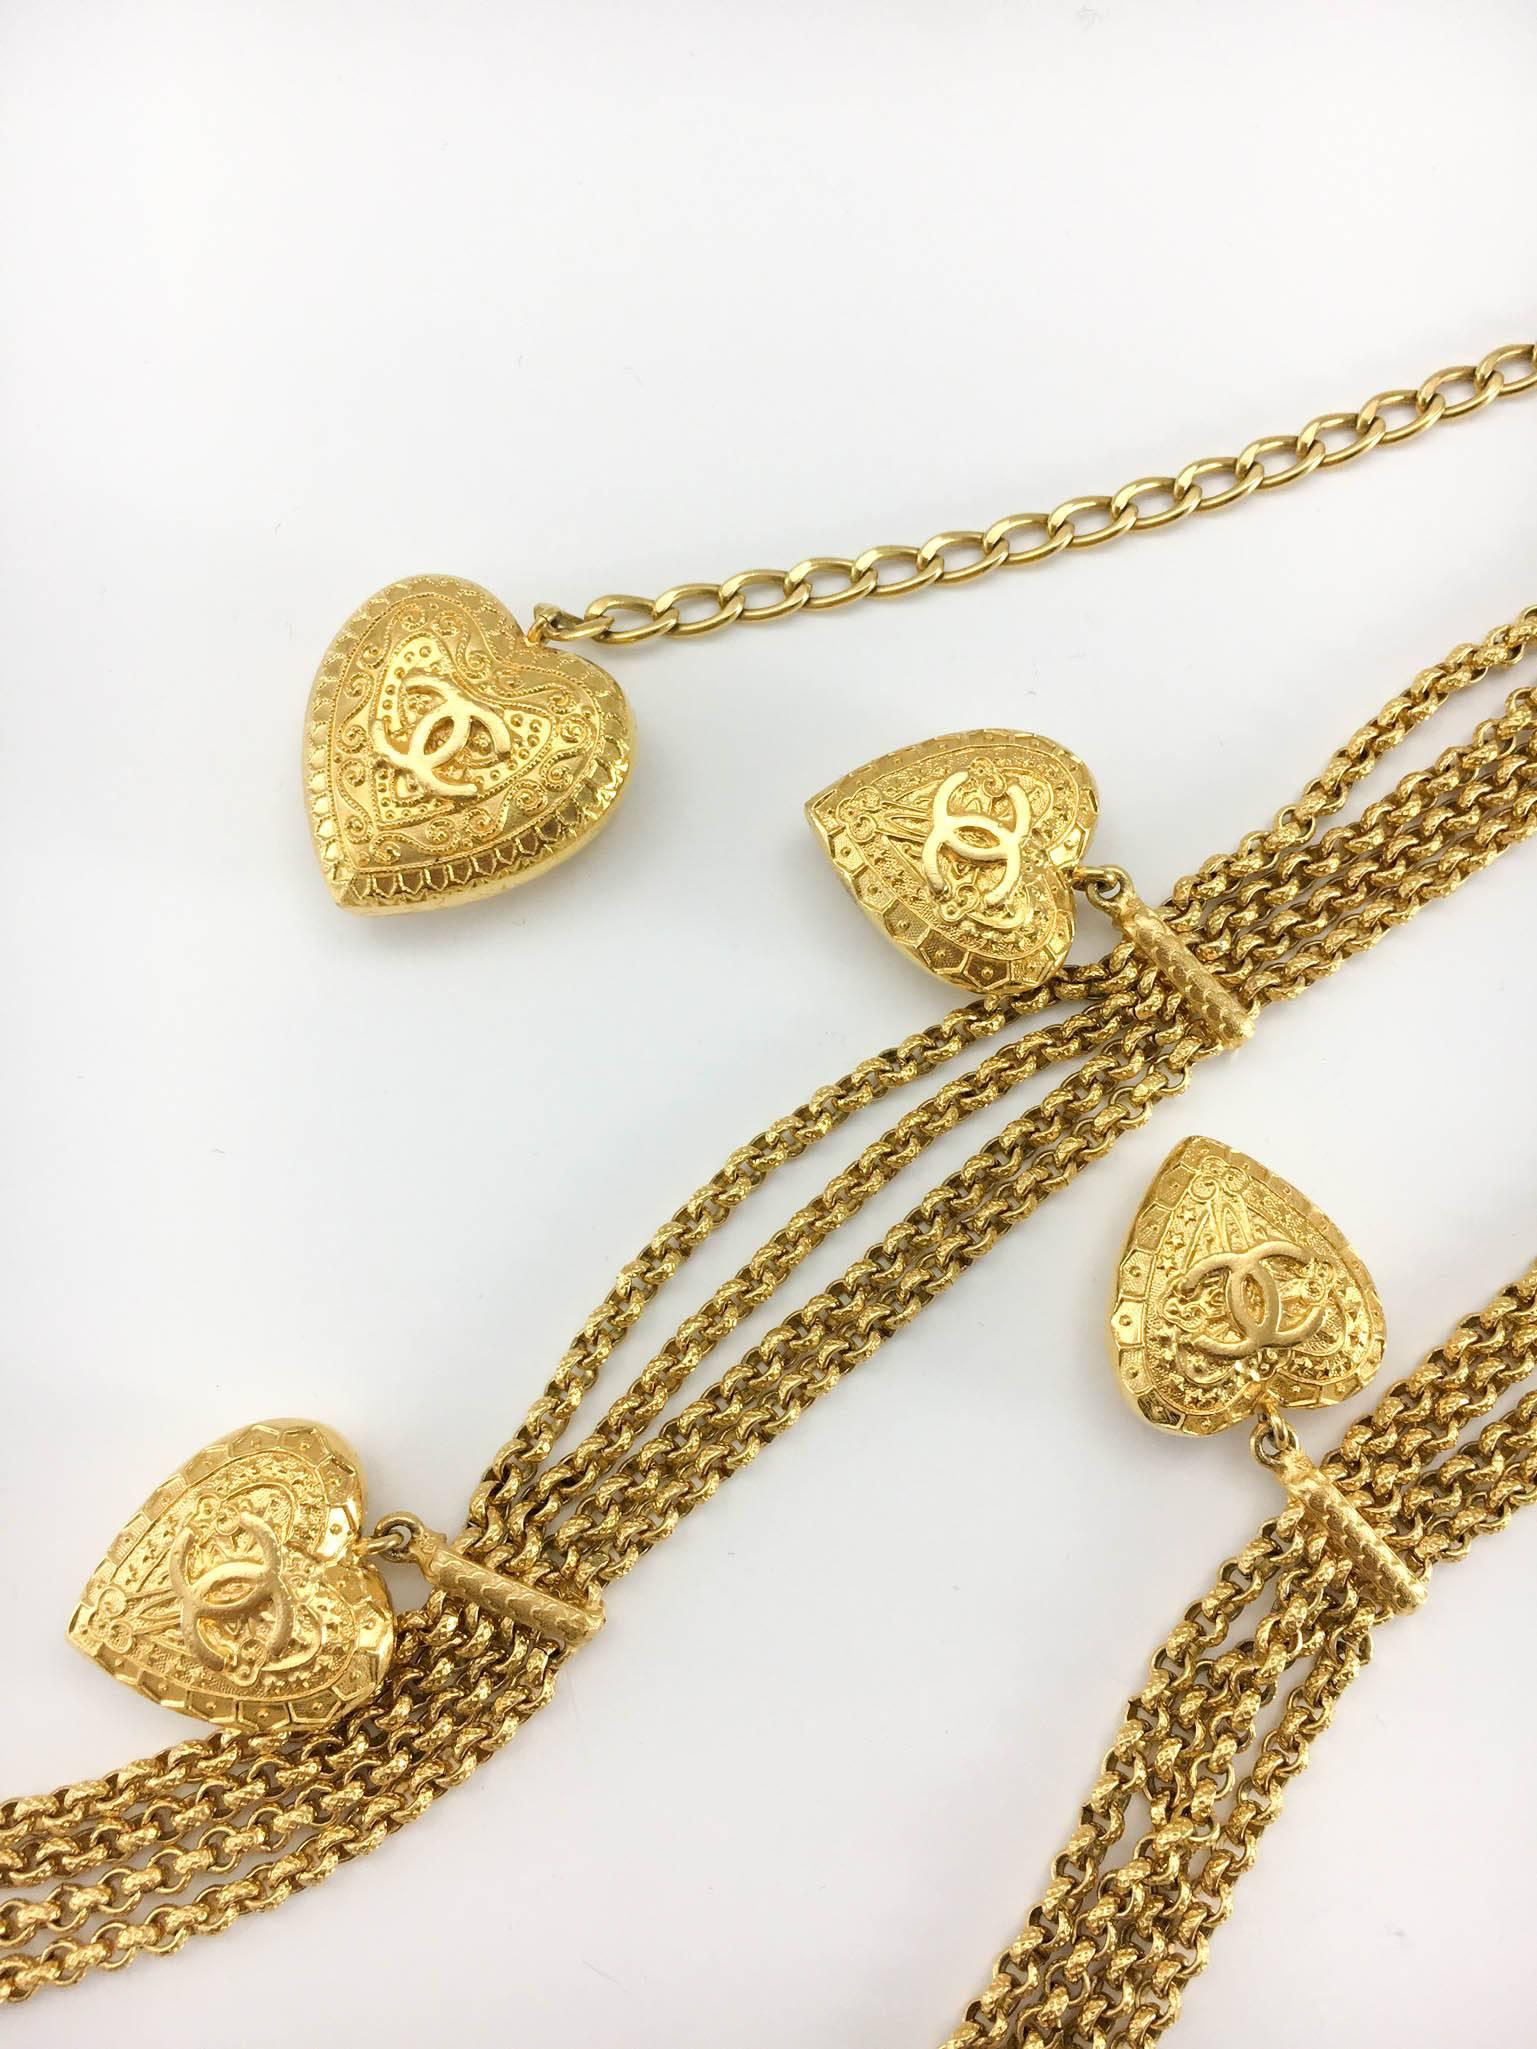 Rare Vintage Chanel Heart Belt / Necklace. This stunning piece by Chanel was created for the Fall/Winter 1996 collection. Versatile, this belt can be worn as a necklace. It is made of 4 strings of chain with 10 hearts distributed along it and a drop